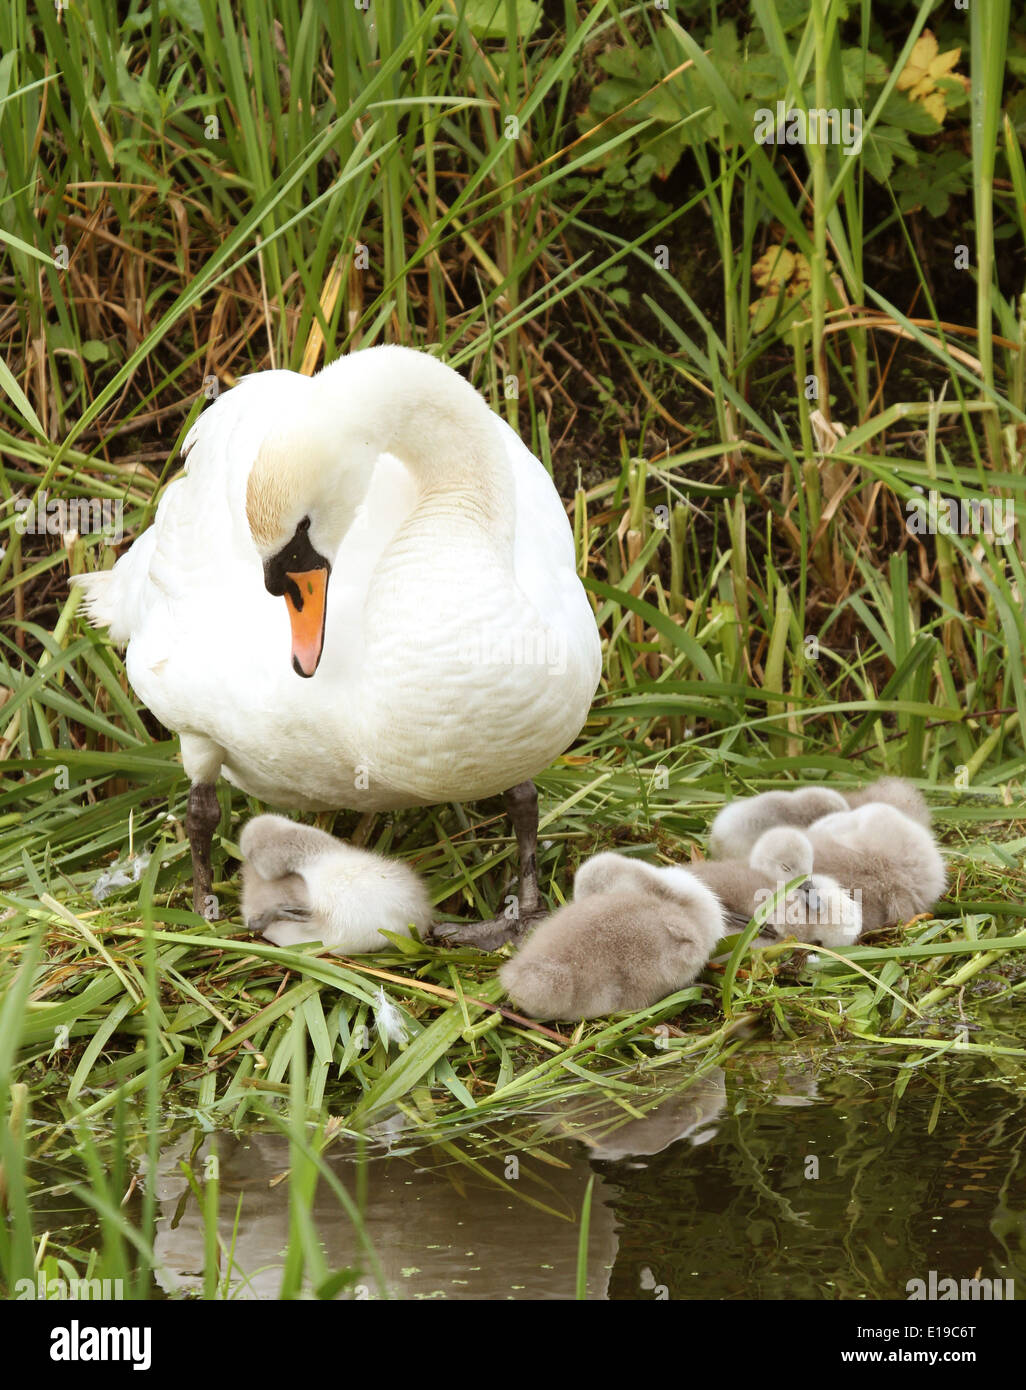 Family of swans with new young cygnets, 26 May 2014 Stock Photo